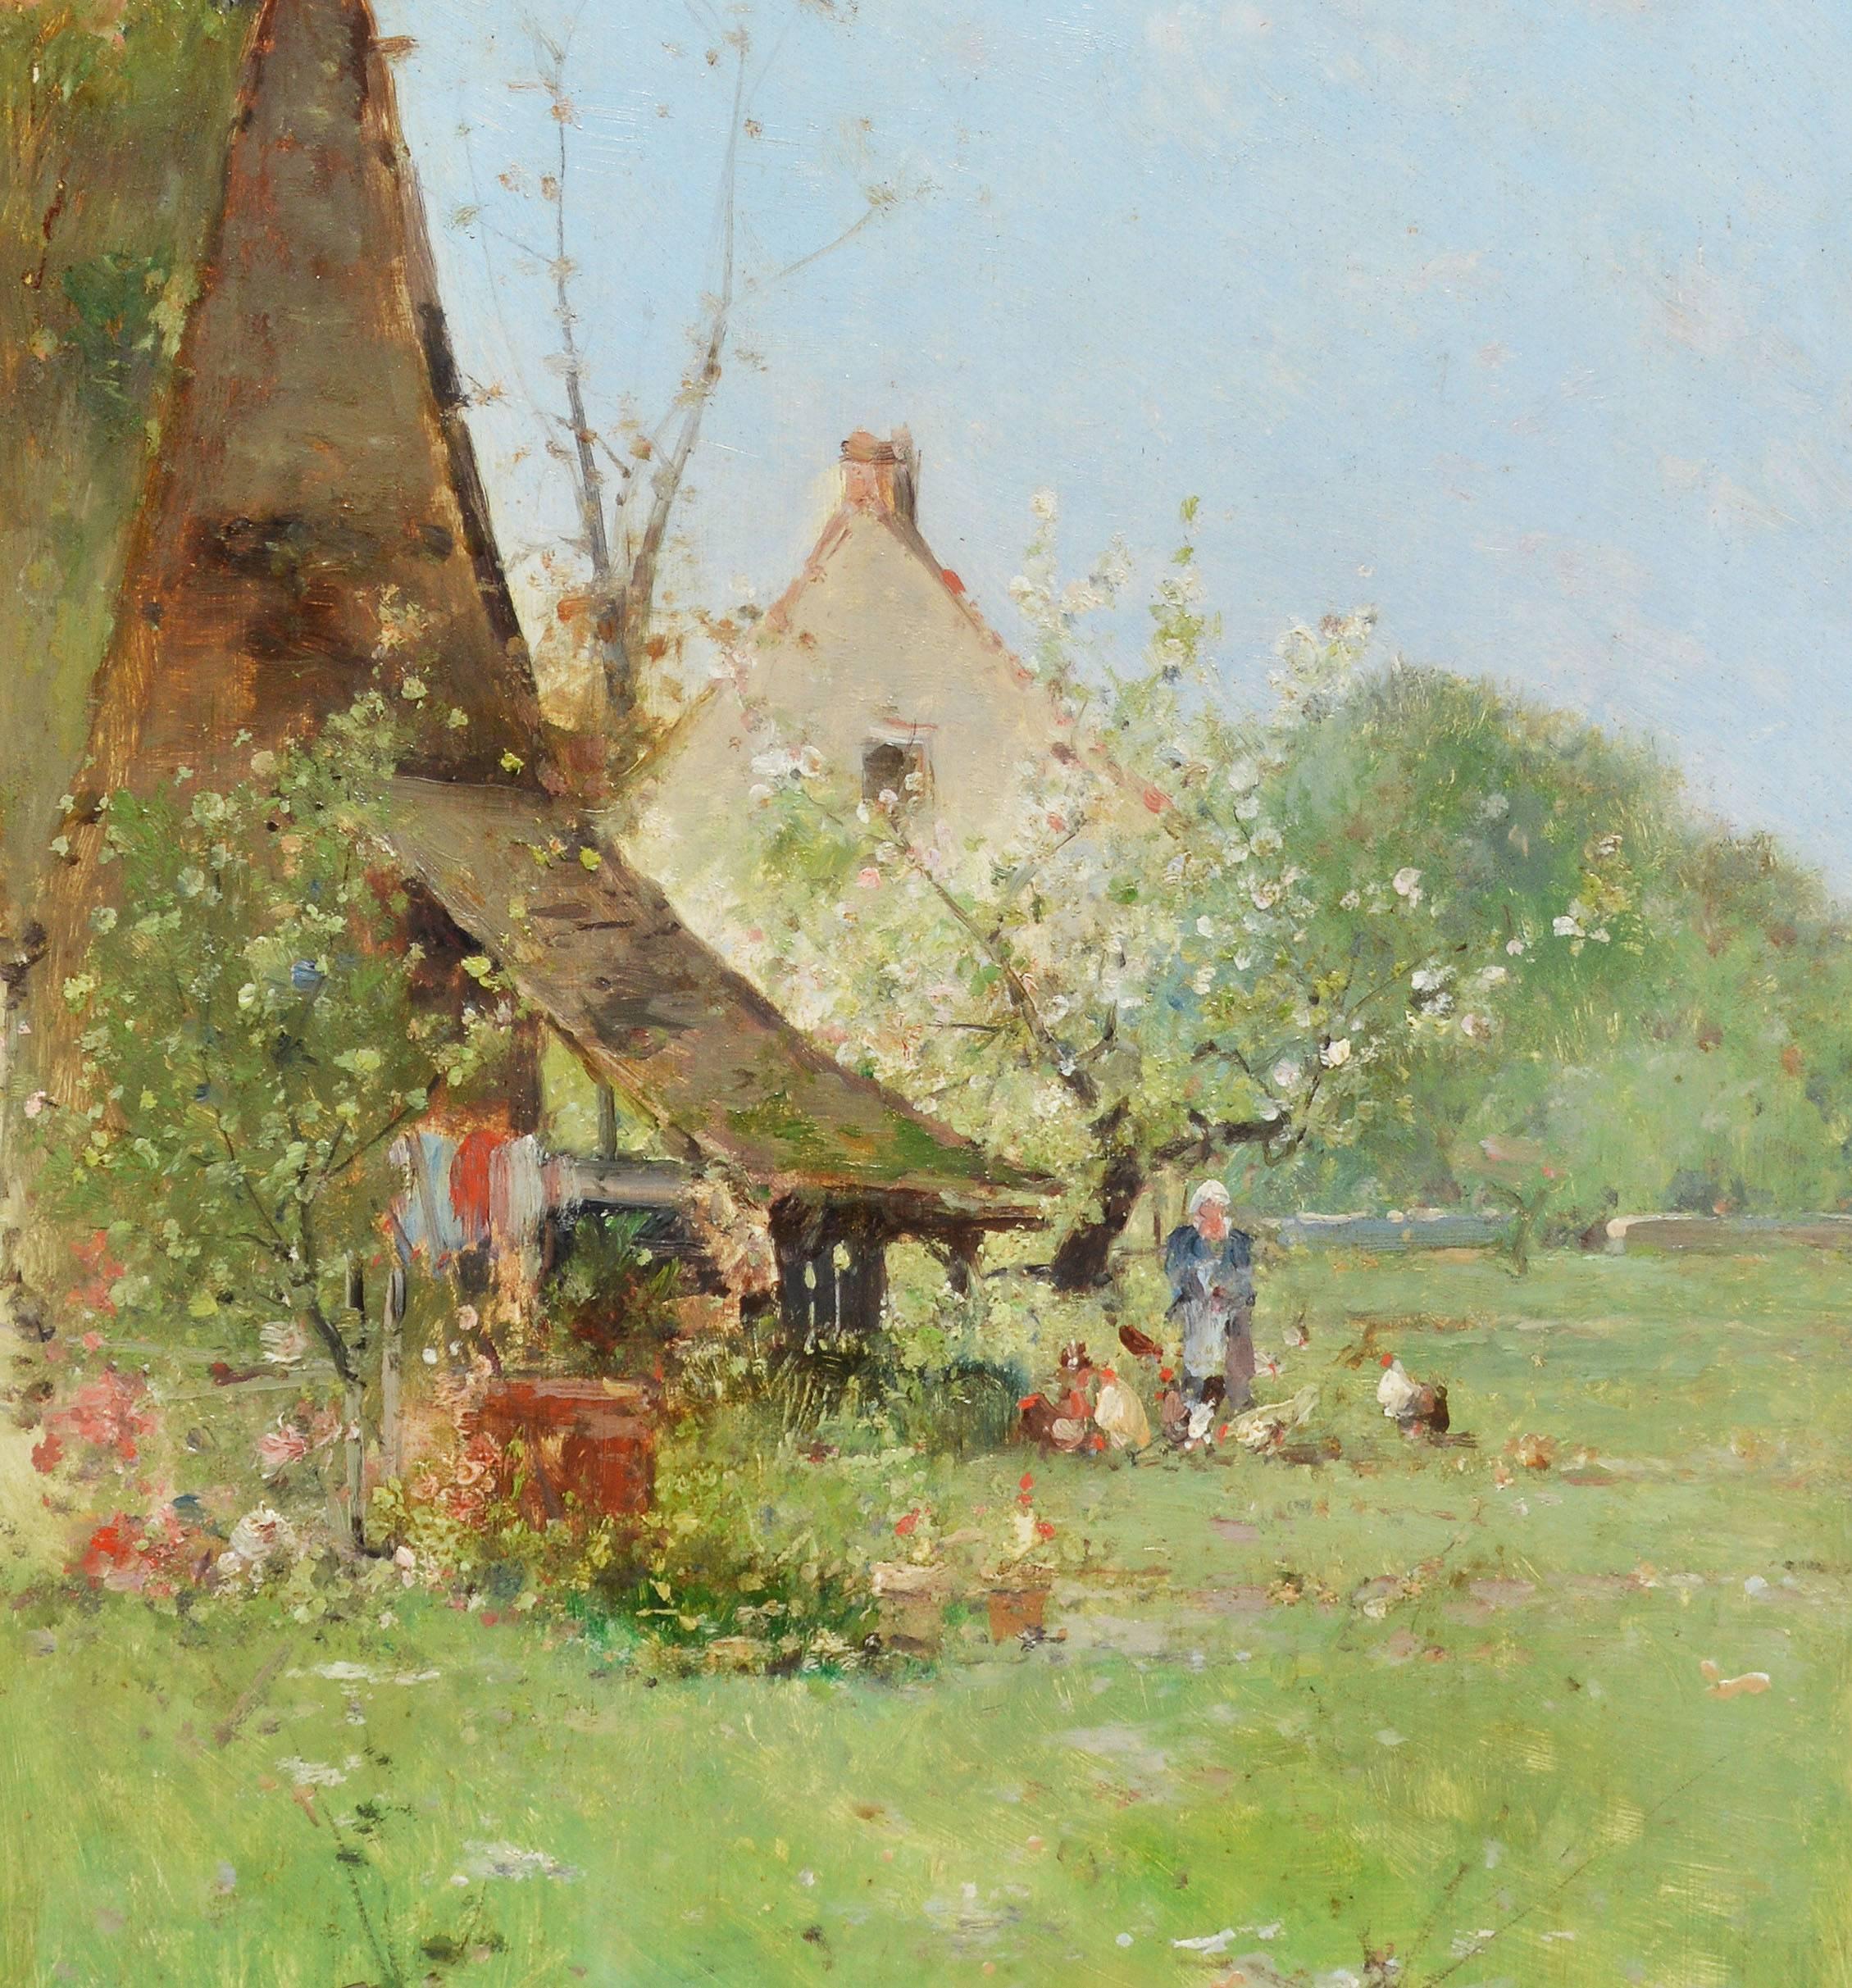 Antique Barbizon school landscape with a figure and chickens by Victor Viollet-le-Duc (1848-1901). Oil on board, circa 1875. Signed lower left, "V. Viollet-le-Duc". Displayed in a period giltwood frame. Image size, 8"L x 12"H,